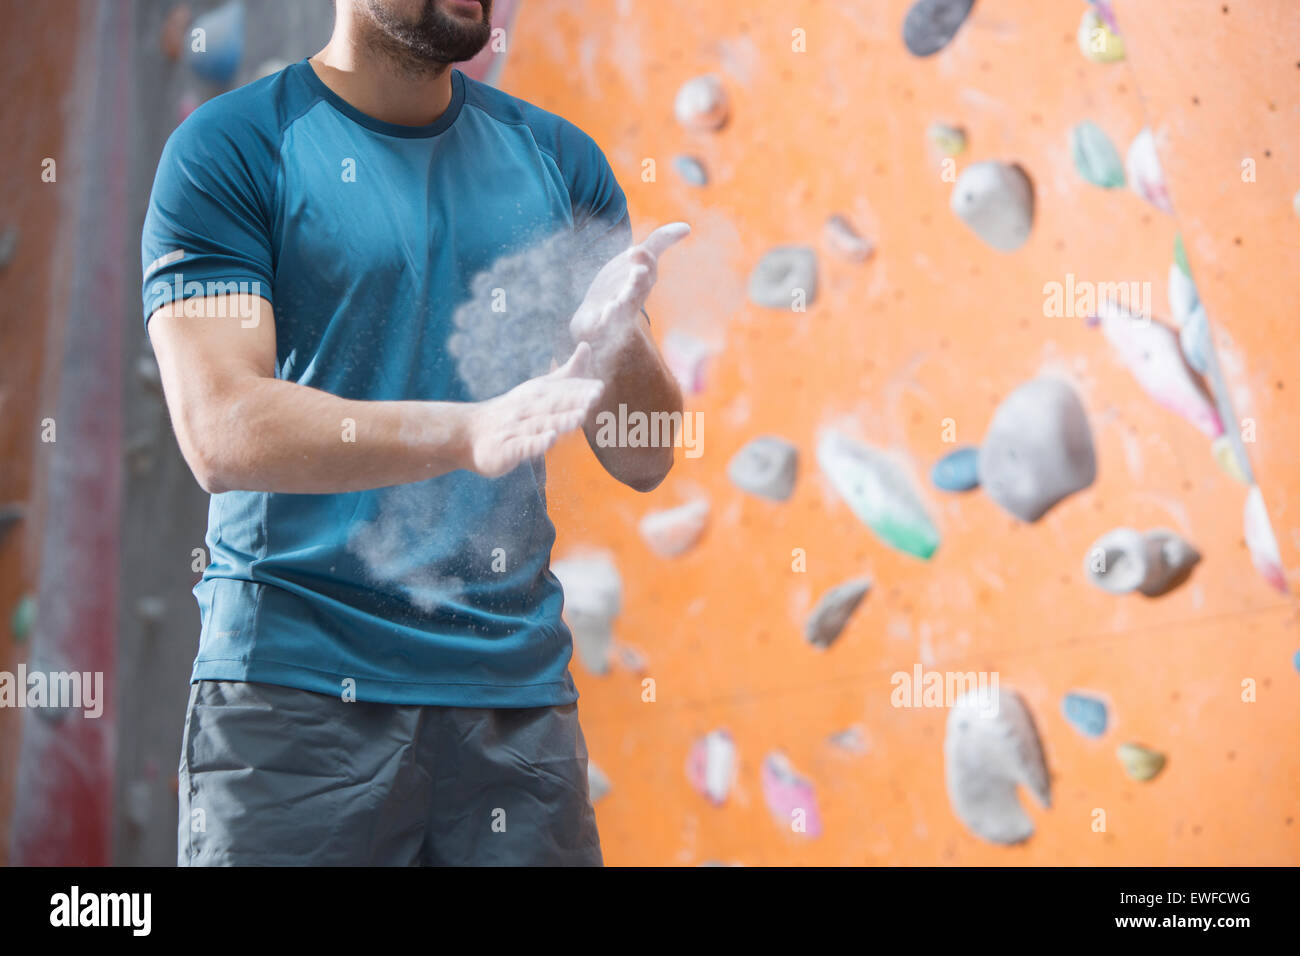 Midsection of man dusting powder by climbing wall in crossfit gym Stock Photo